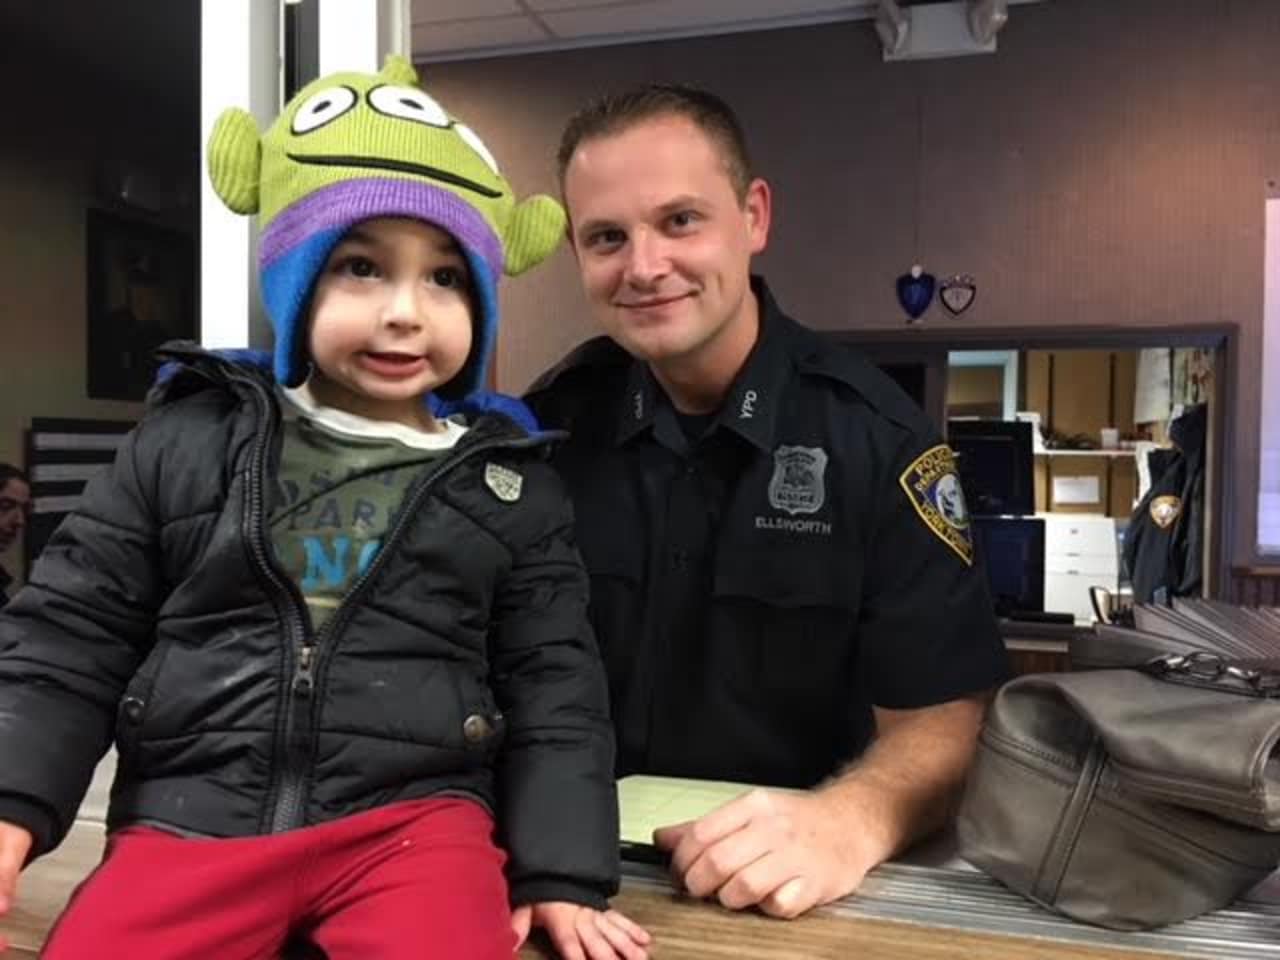 Three-year-old Landon Pruyne poses with a Yorktown Police Officer after turning in a wallet he found.